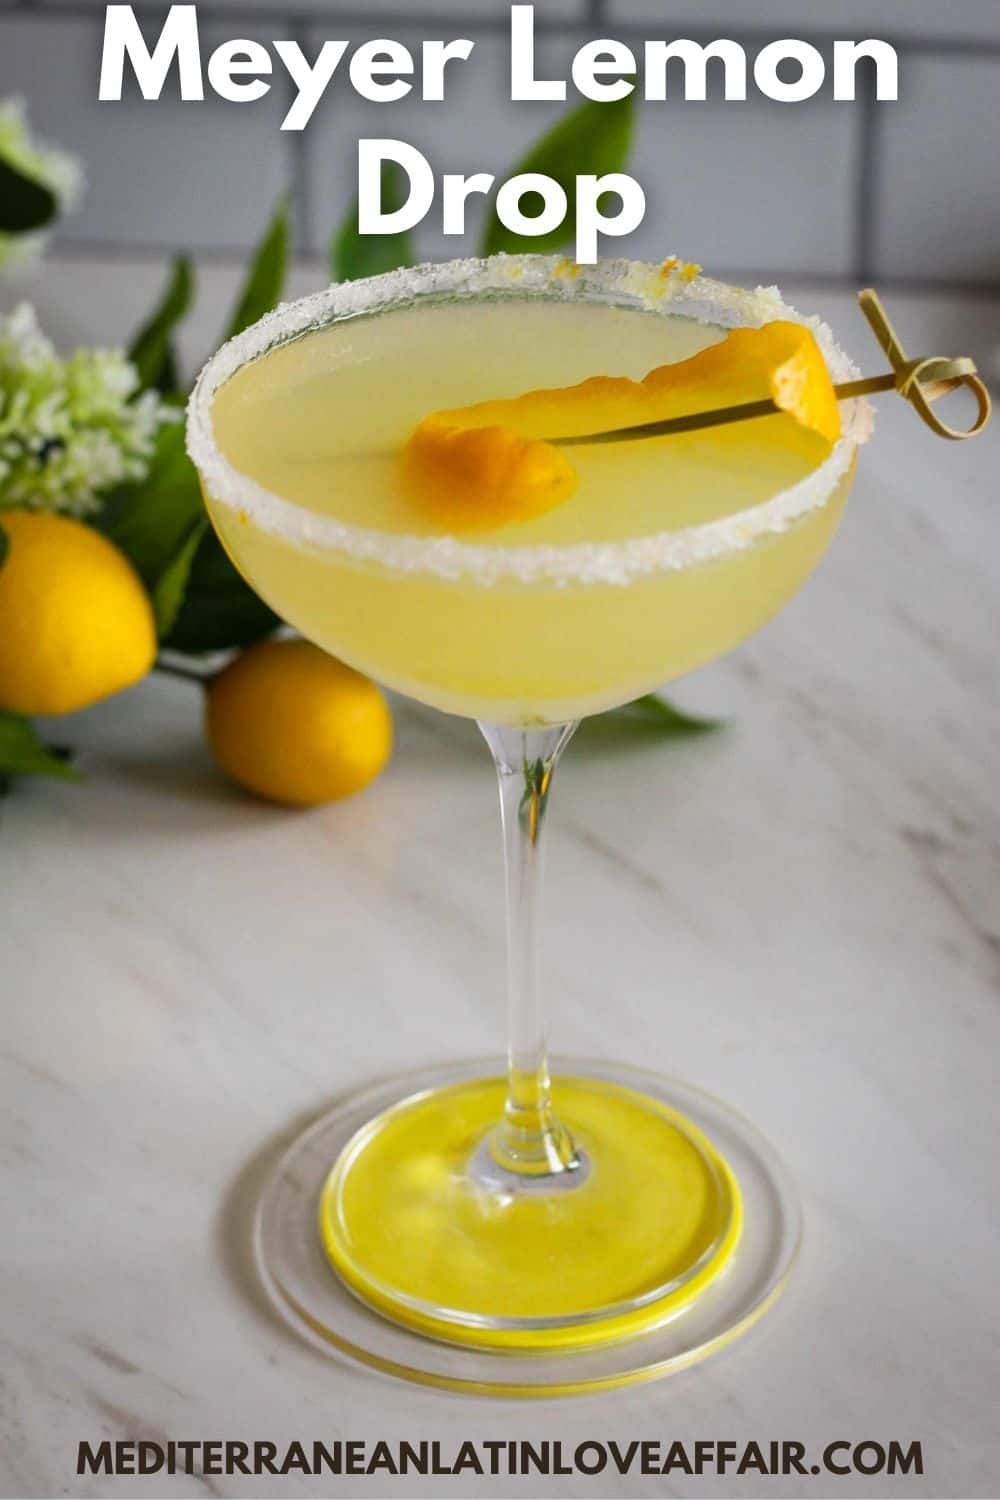 An image prepared for Pinterest. It shows a picture of a cocktail glass with Meyer Lemon Drop cocktail garnished with lemon peel. Picture has a title bar on top and website link at the bottom.